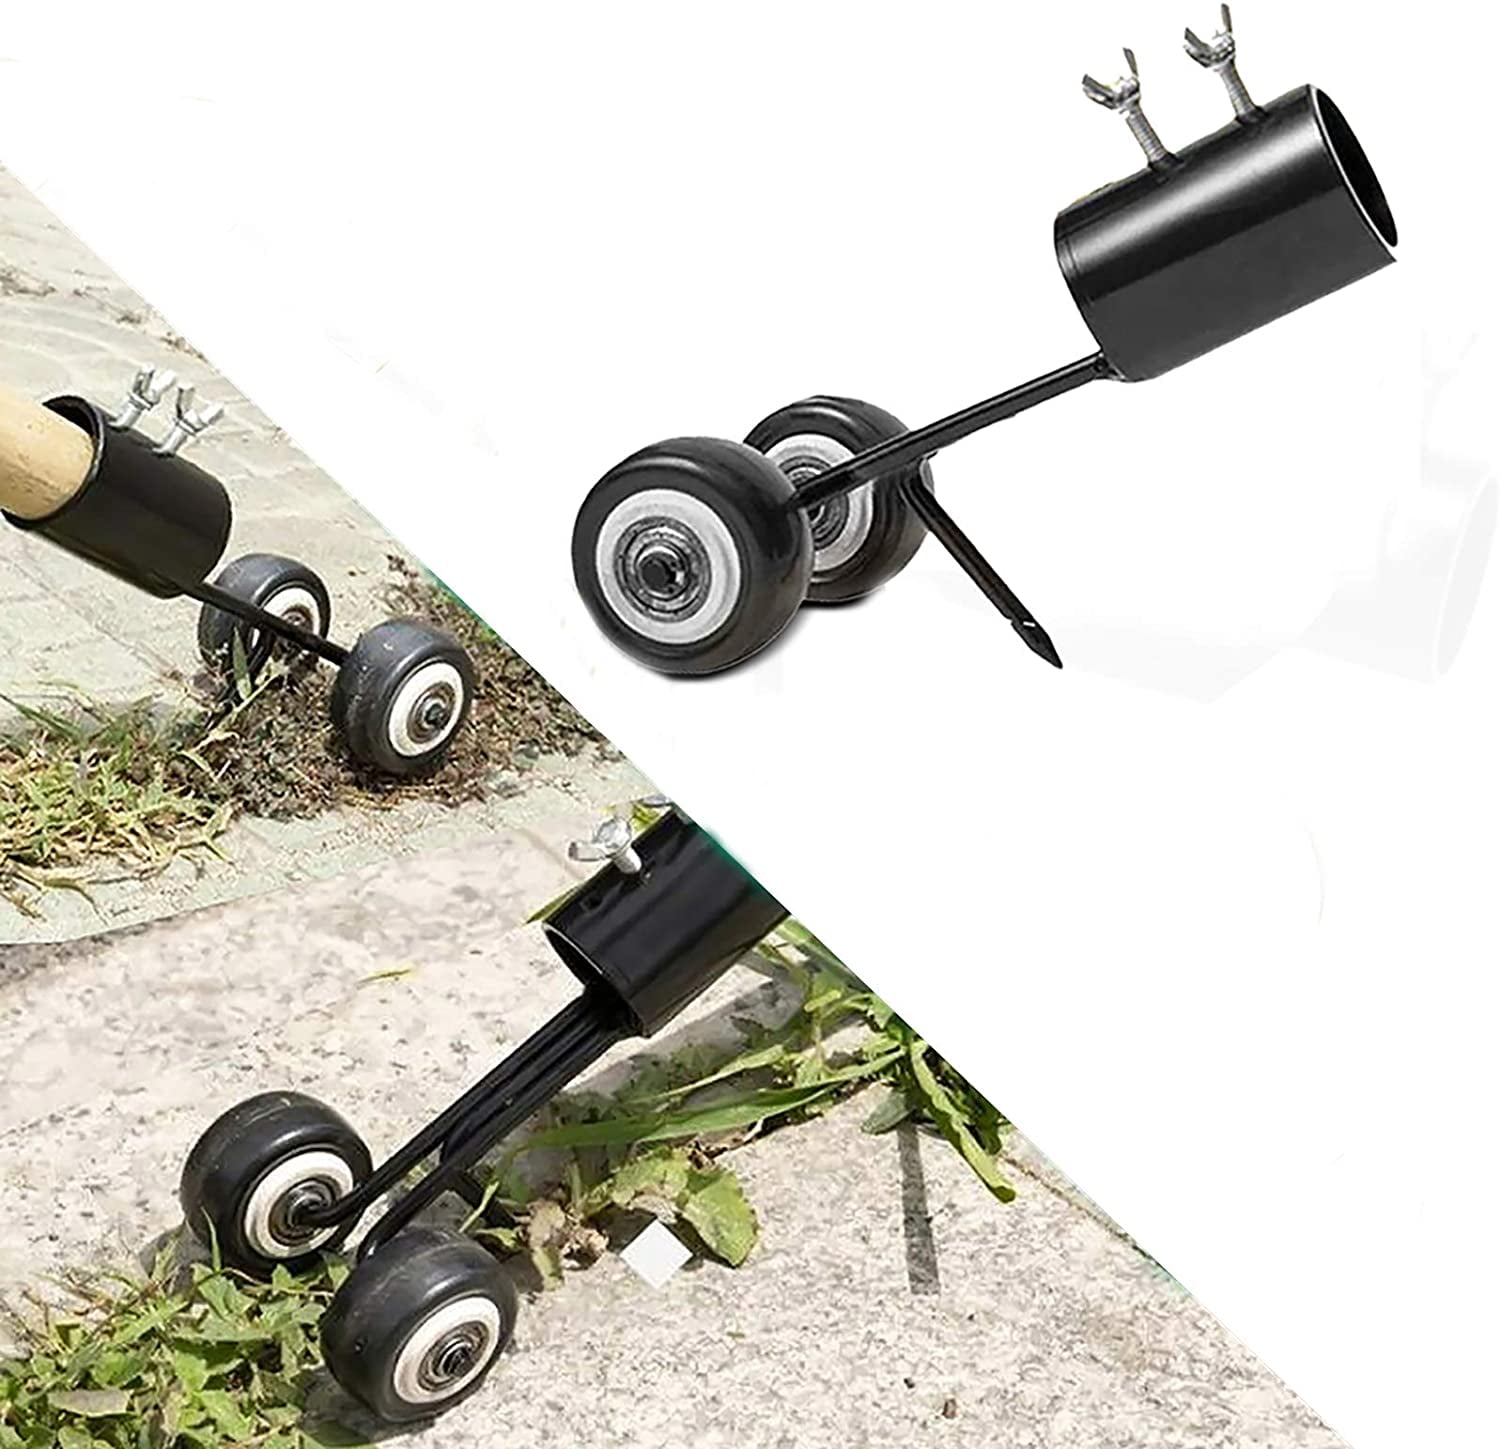 Curved Weed Puller Weeds Snatcher Crack and Crevice Weeding Tool Manual Weeder Garden Tools for Patio Backyard Sidewalk Driveways PcleasureCD Stand Up Weed Puller Tool 